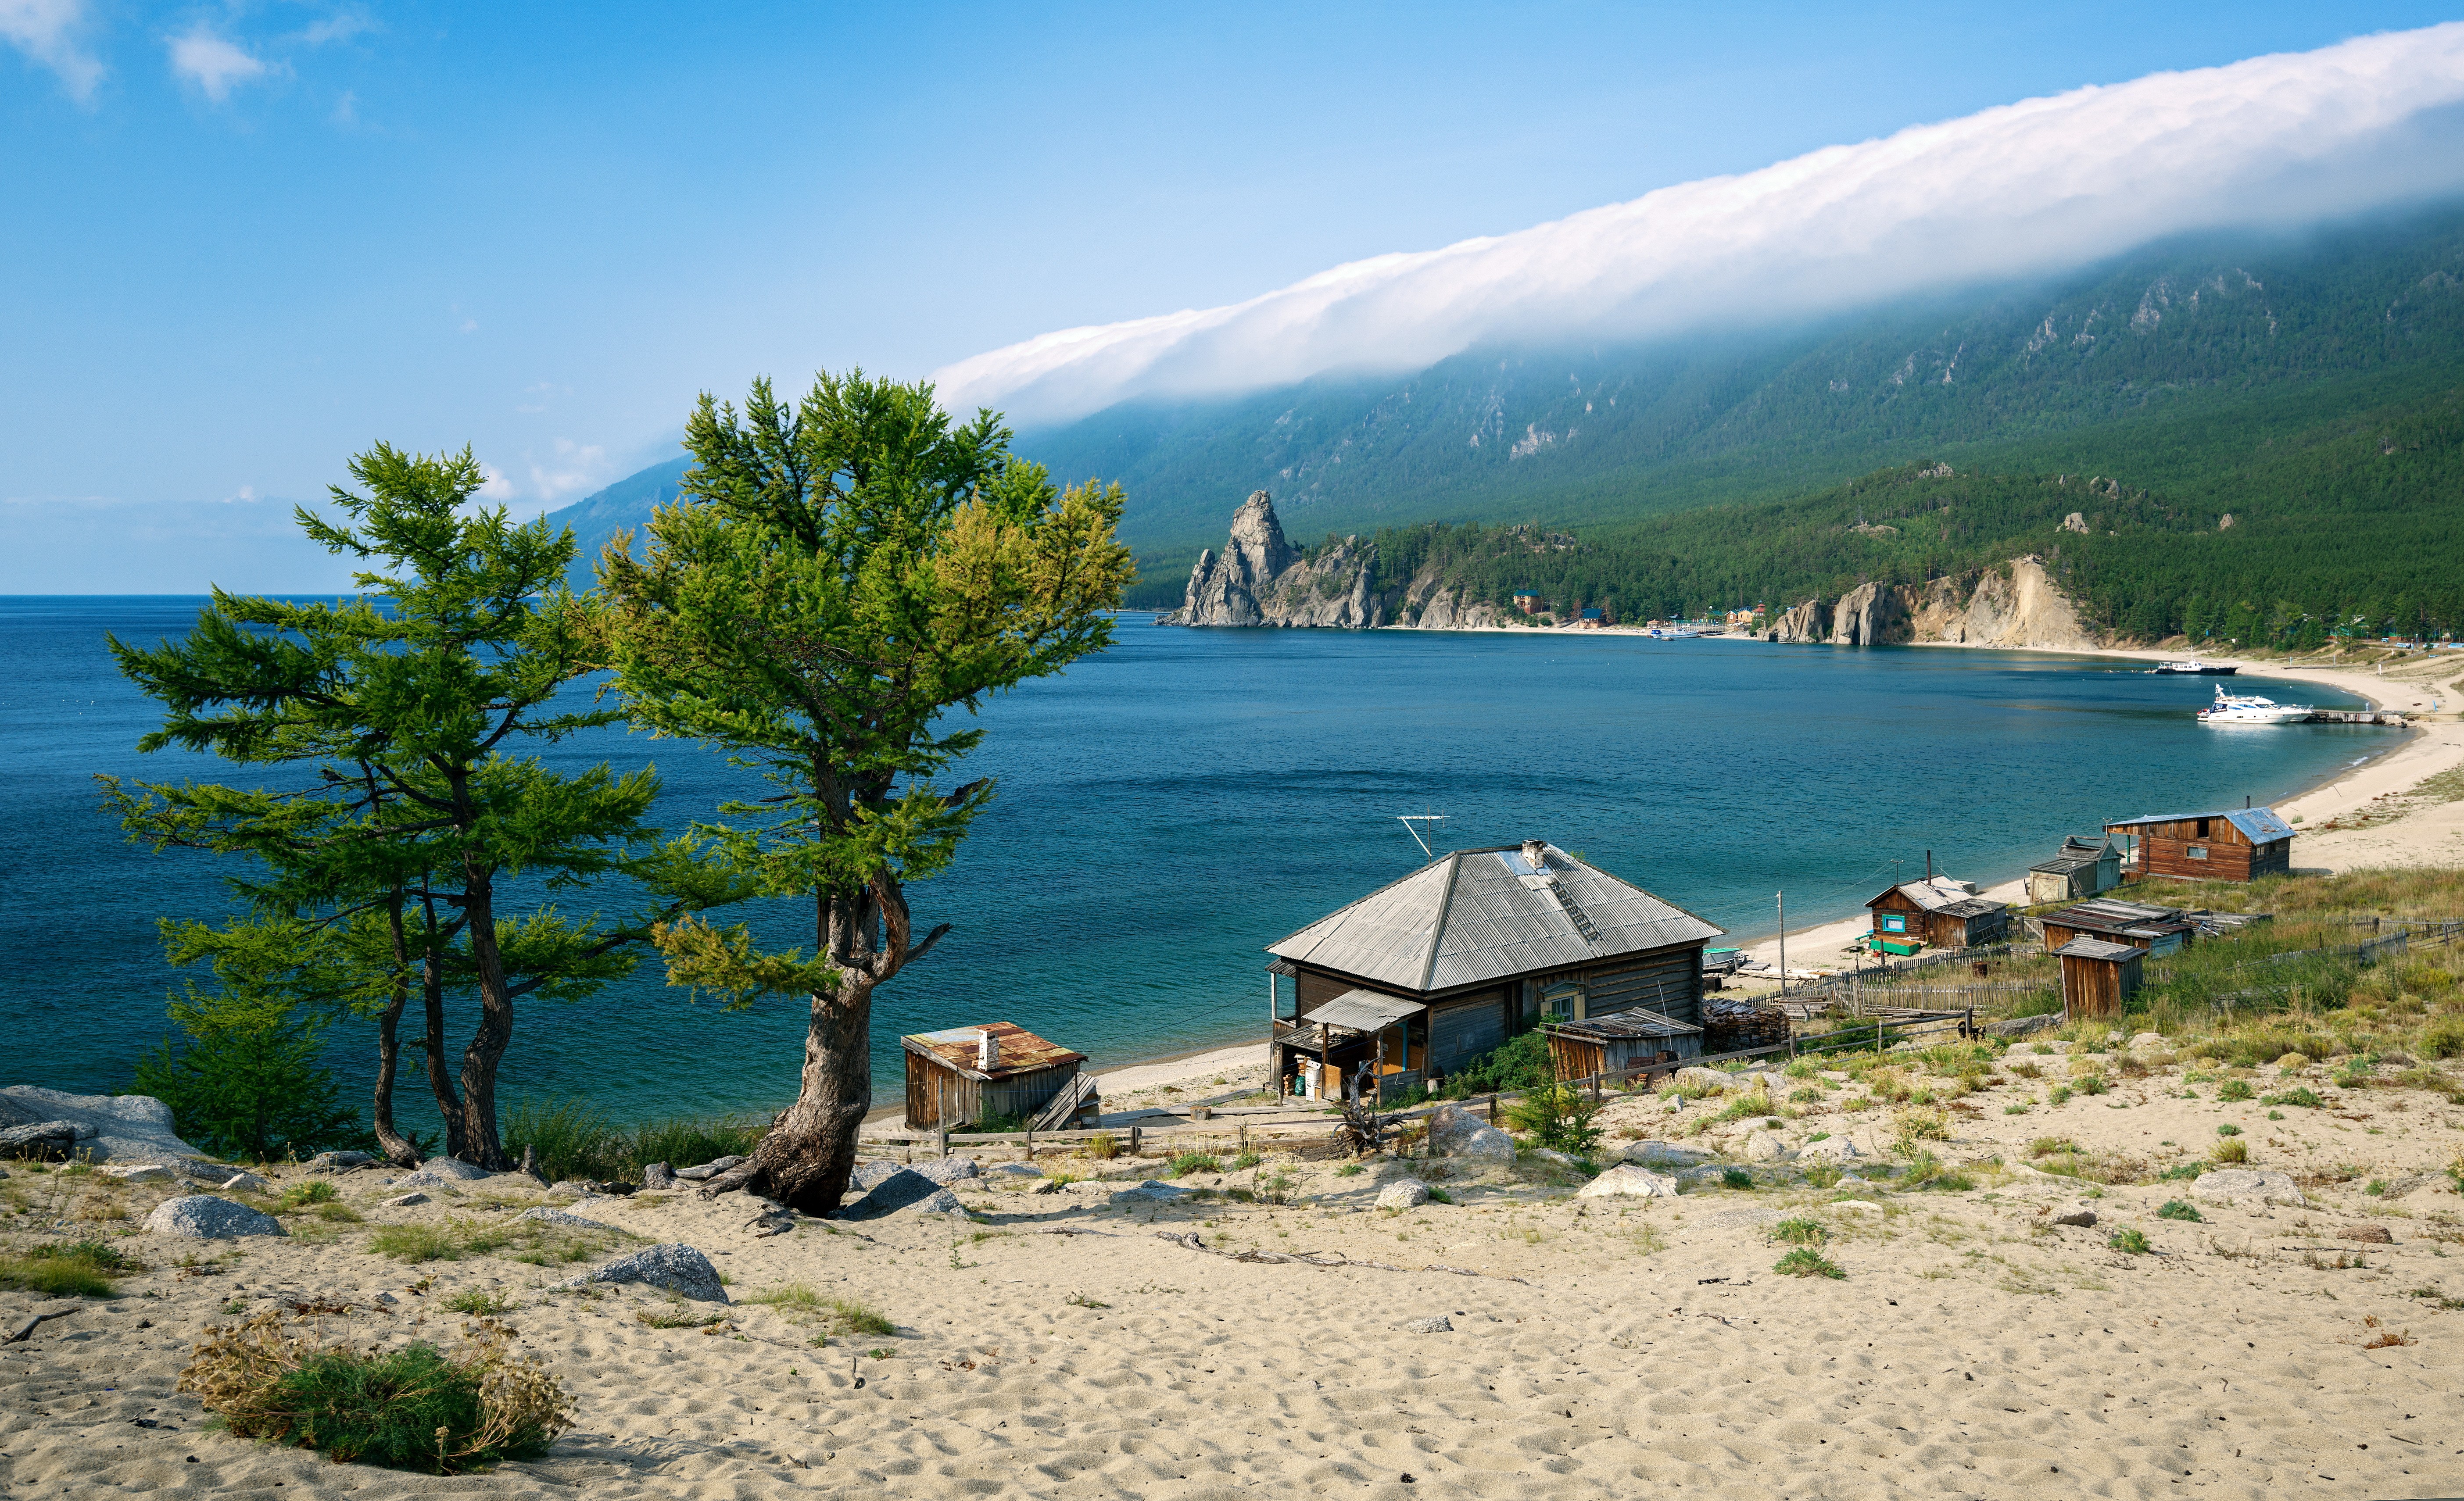 Nature Landscape Water Lake Mountains Trees Clouds Lake Baikal Russia House Boat Sand Beach Forest M 5616x3422